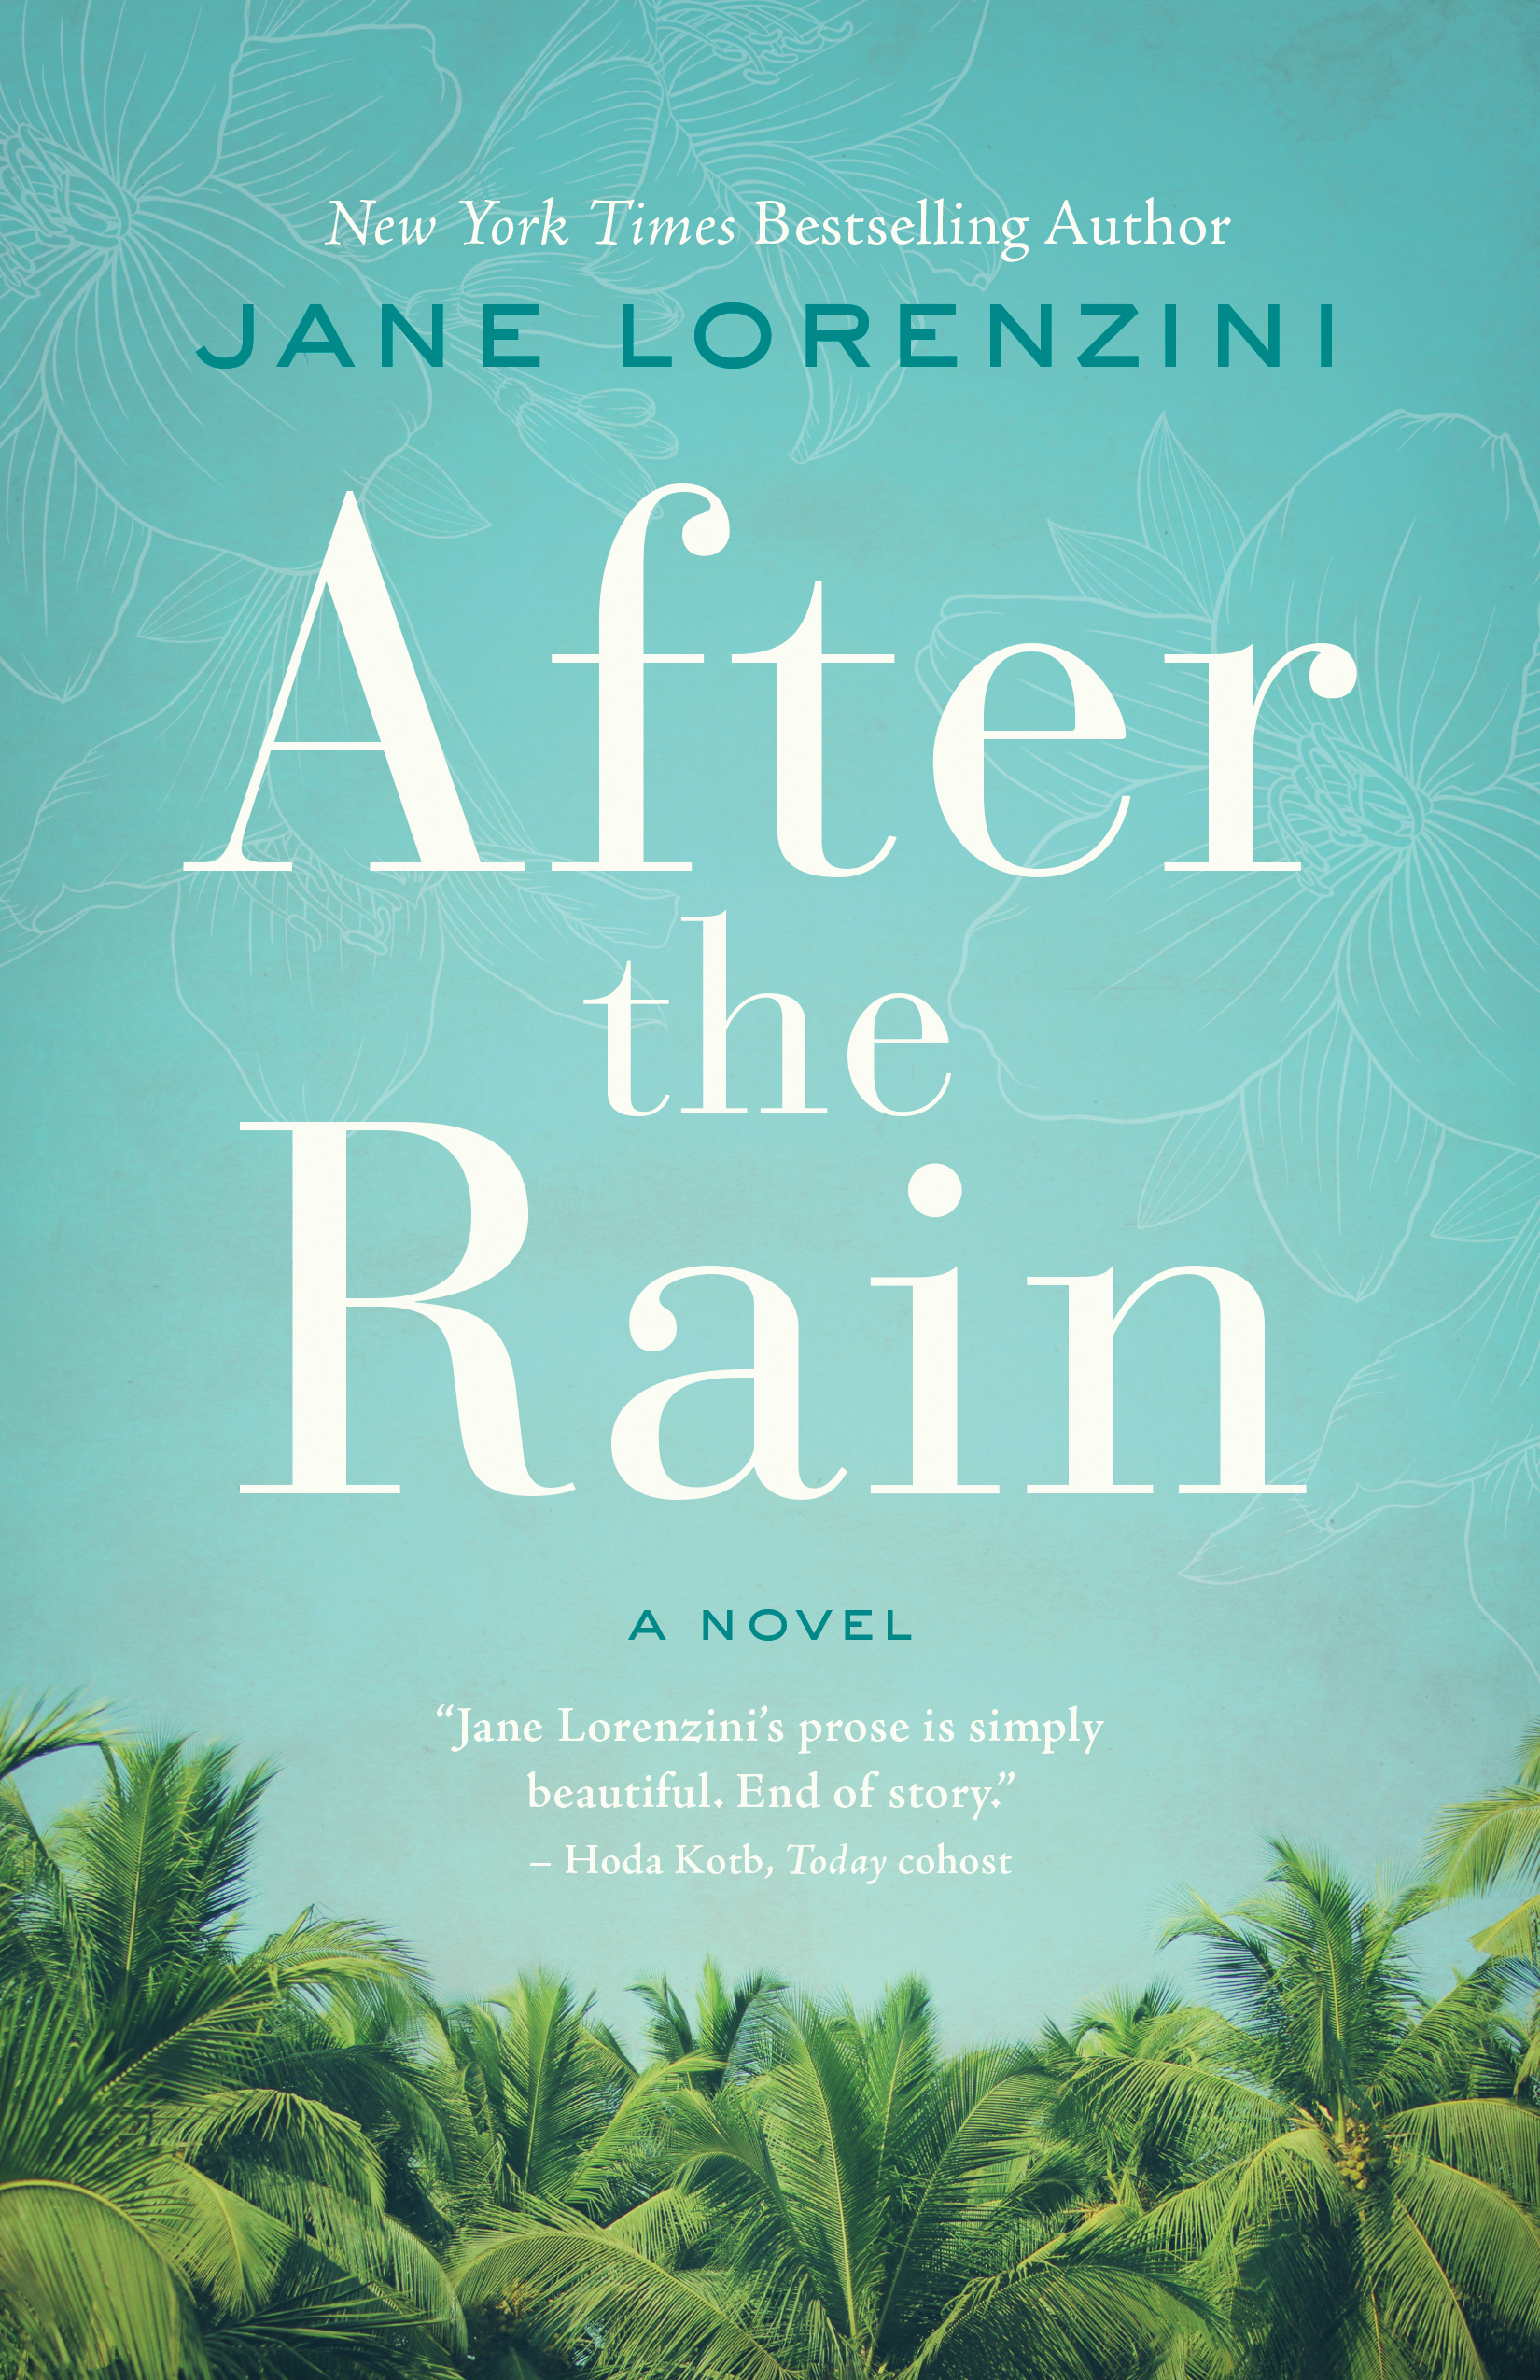 After the Rain - Front Cover - High Res.jpg